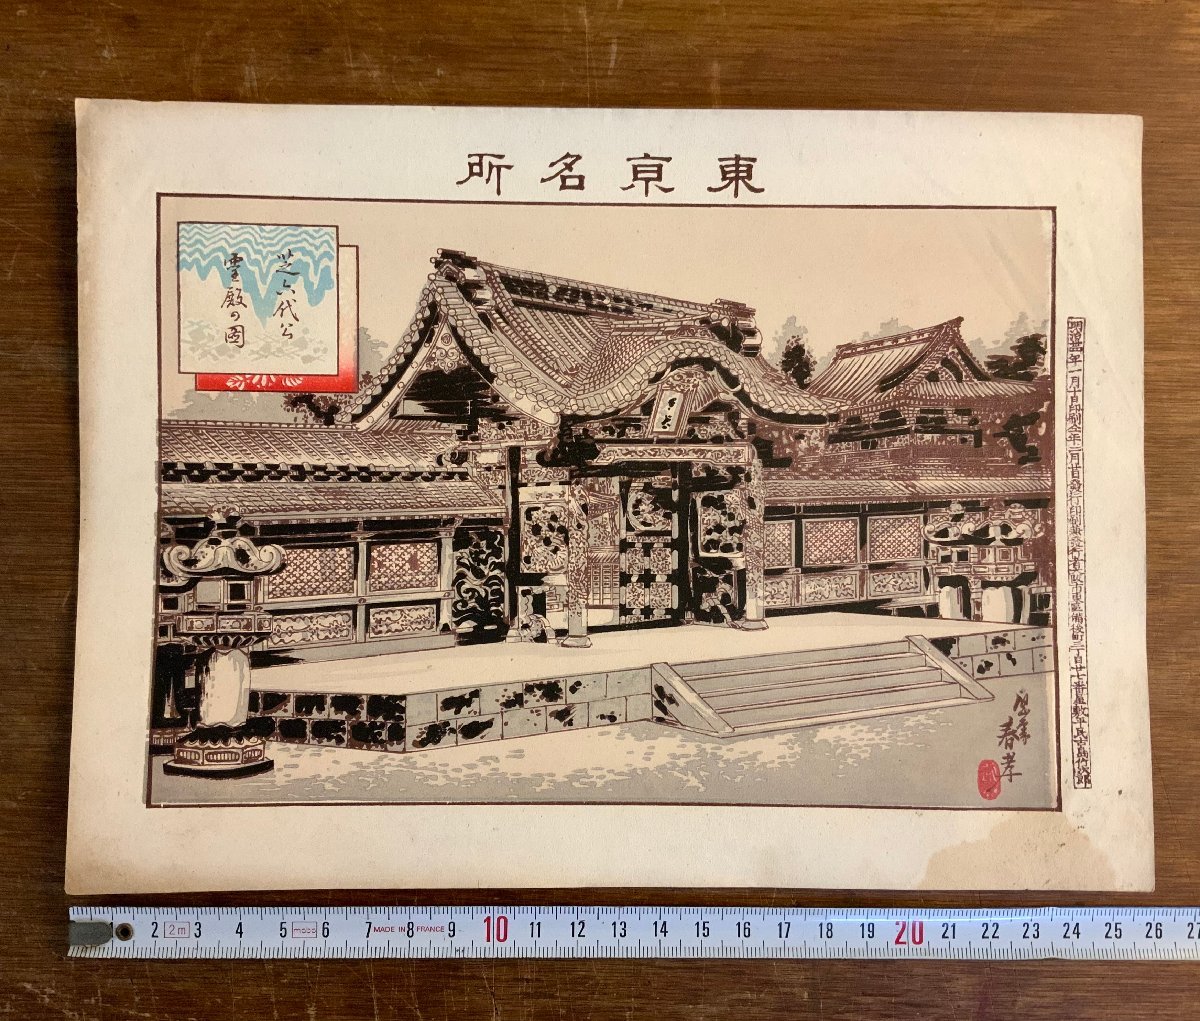 LL-6960 # including carriage # Tokyo name place lawn grass six fee .. dono. . Meiji 34 year wide . spring . maple . old island bamboo next . lithograph ukiyoe picture old book old document /.JY.